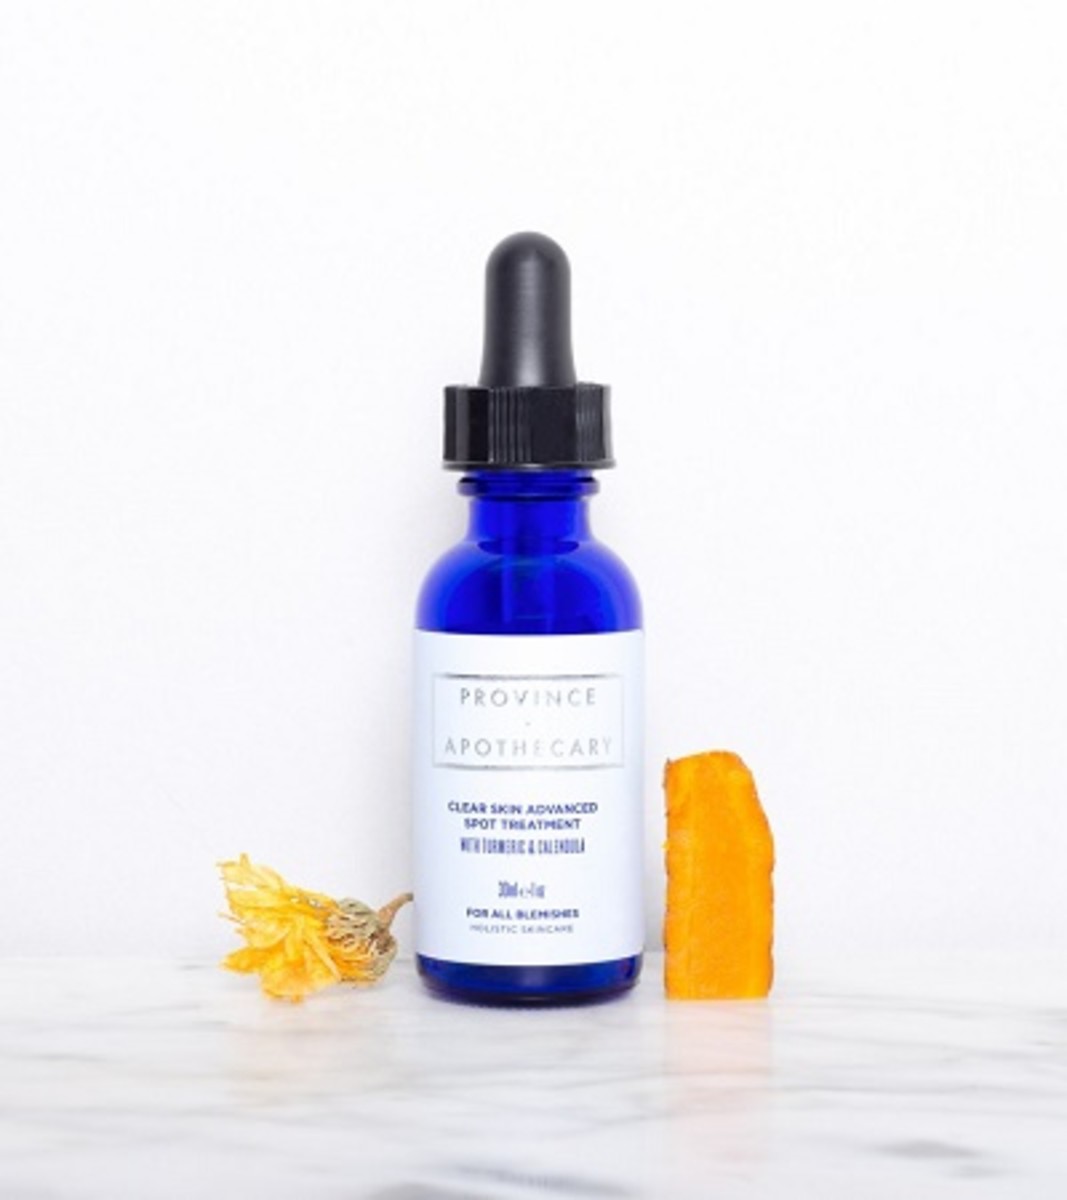 Province Apothecary CLEAR SKIN ADVANCED SPOT SERUM